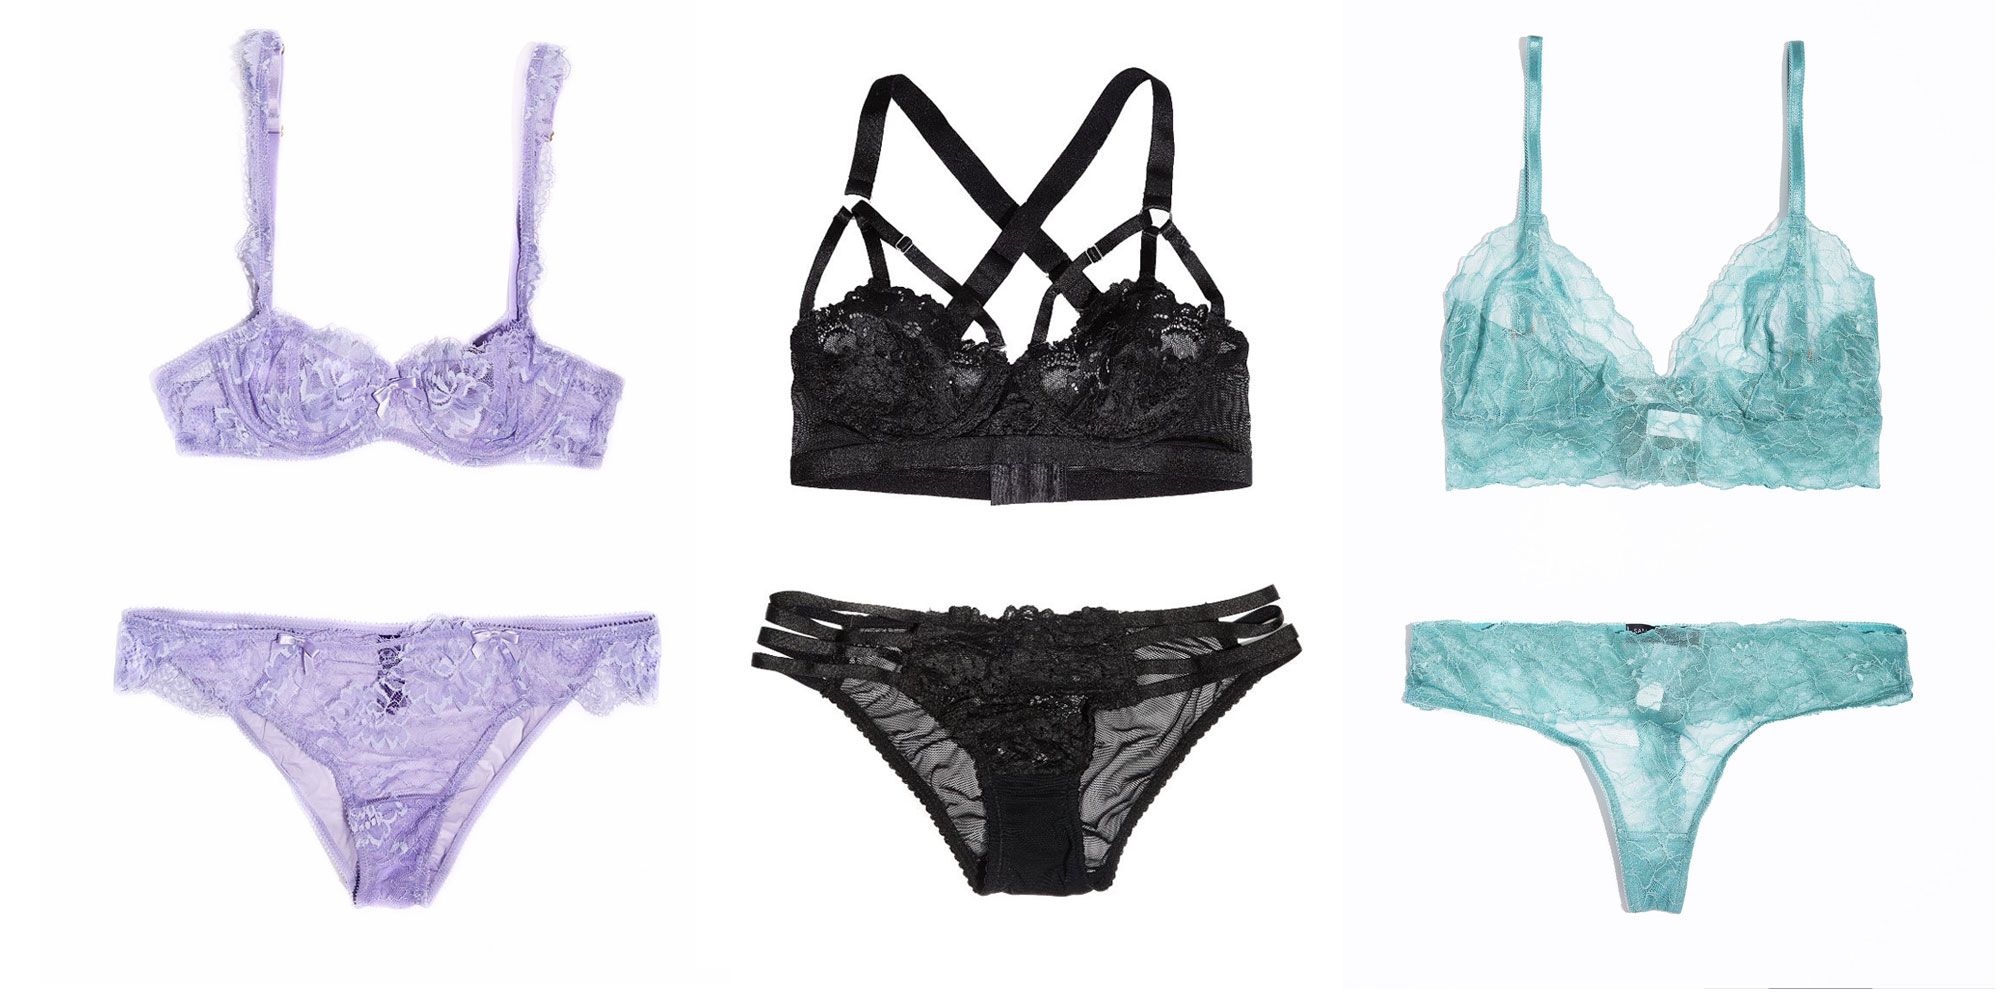 I Wore Fancy Lingerie a Week and My Whole Life Changed